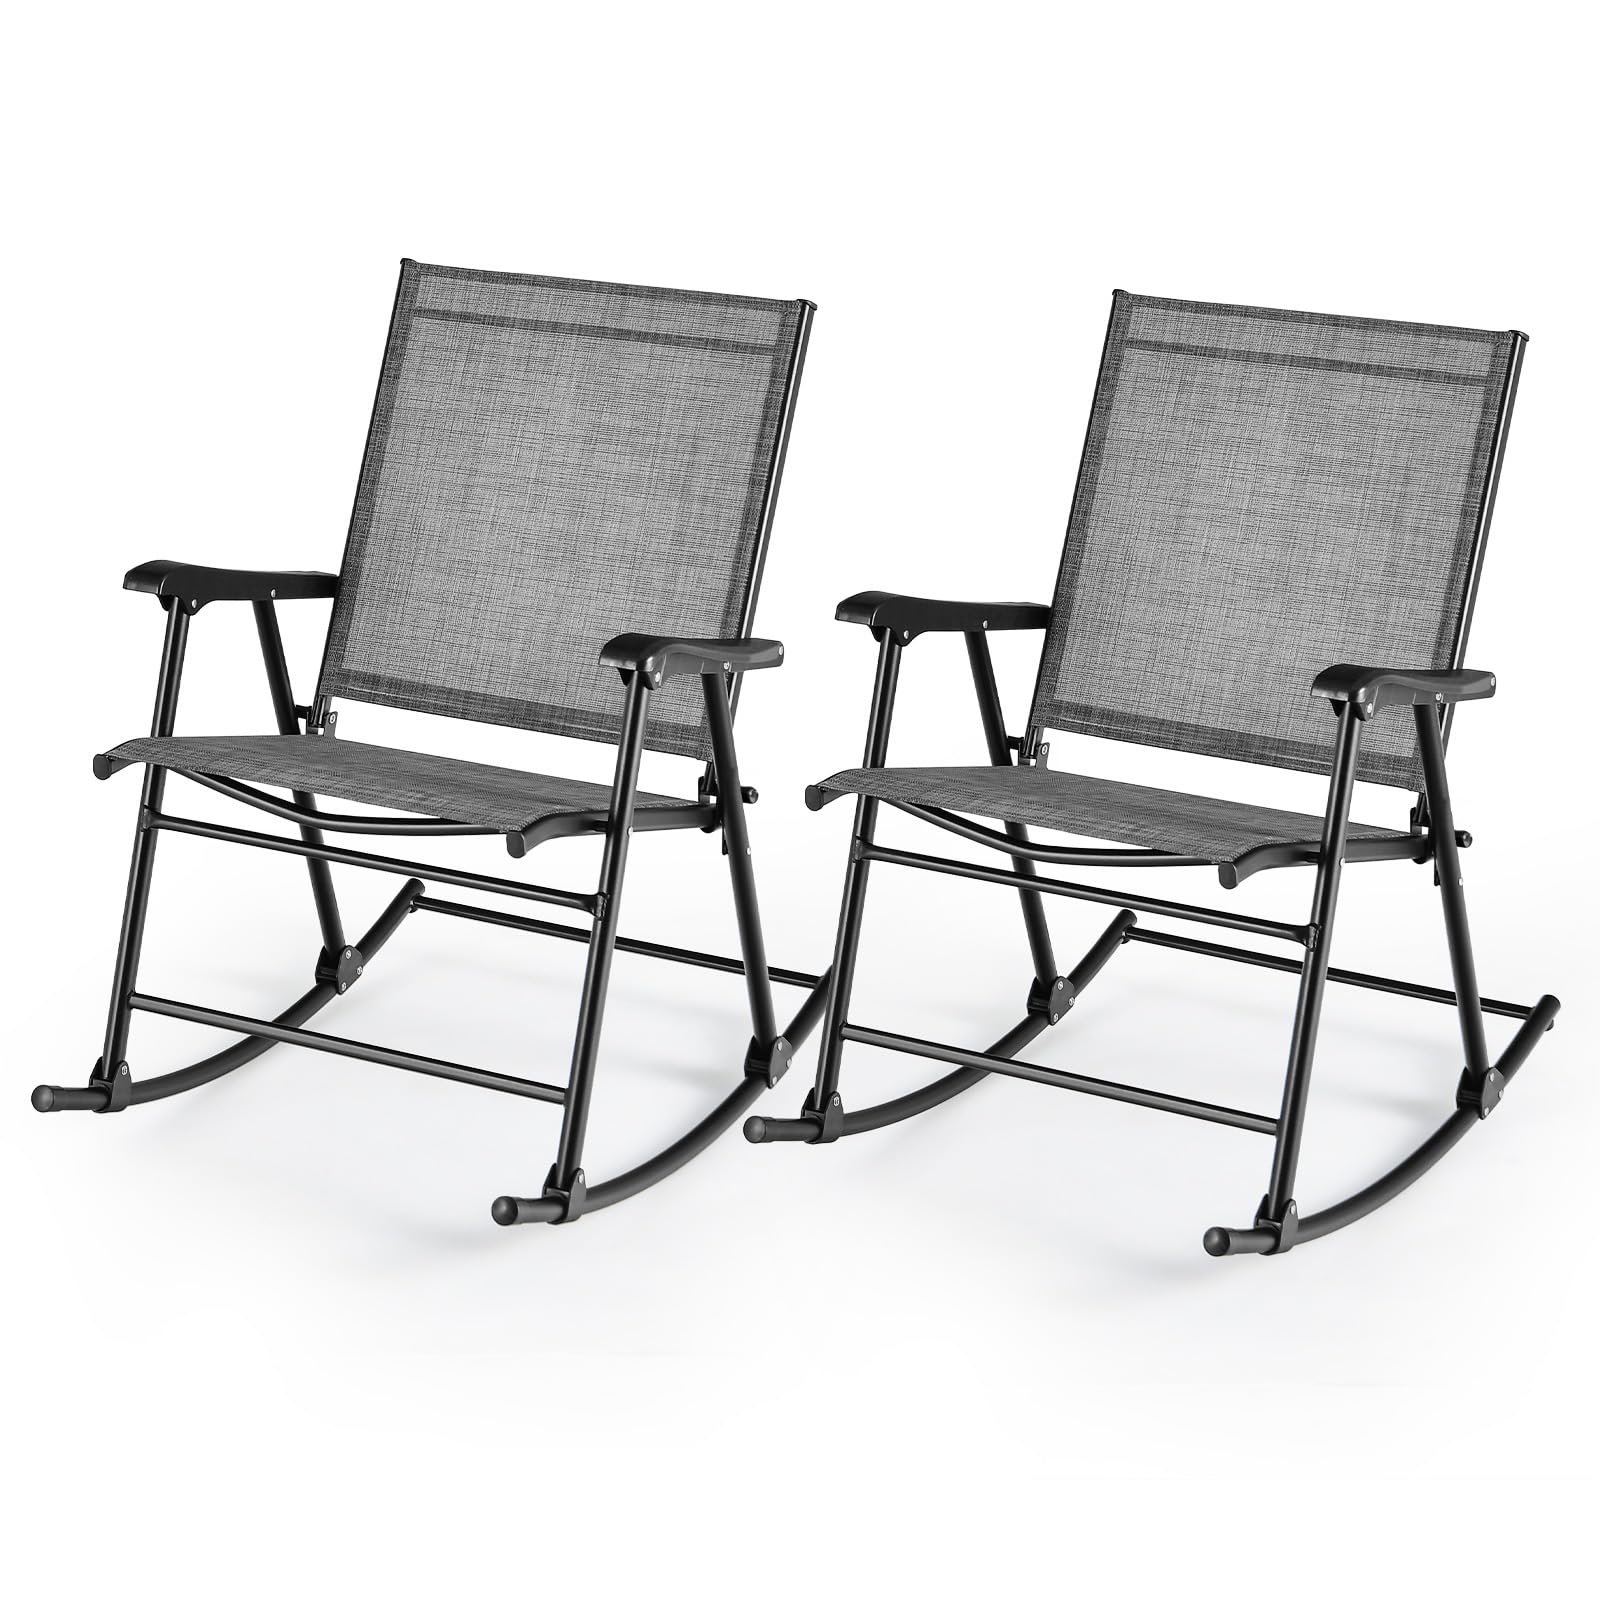 Giantex Folding Rocking Chairs Set of 2 - High Back Patio Rocking Chairs w/Armrests and Footrests, Breathable Back Rest